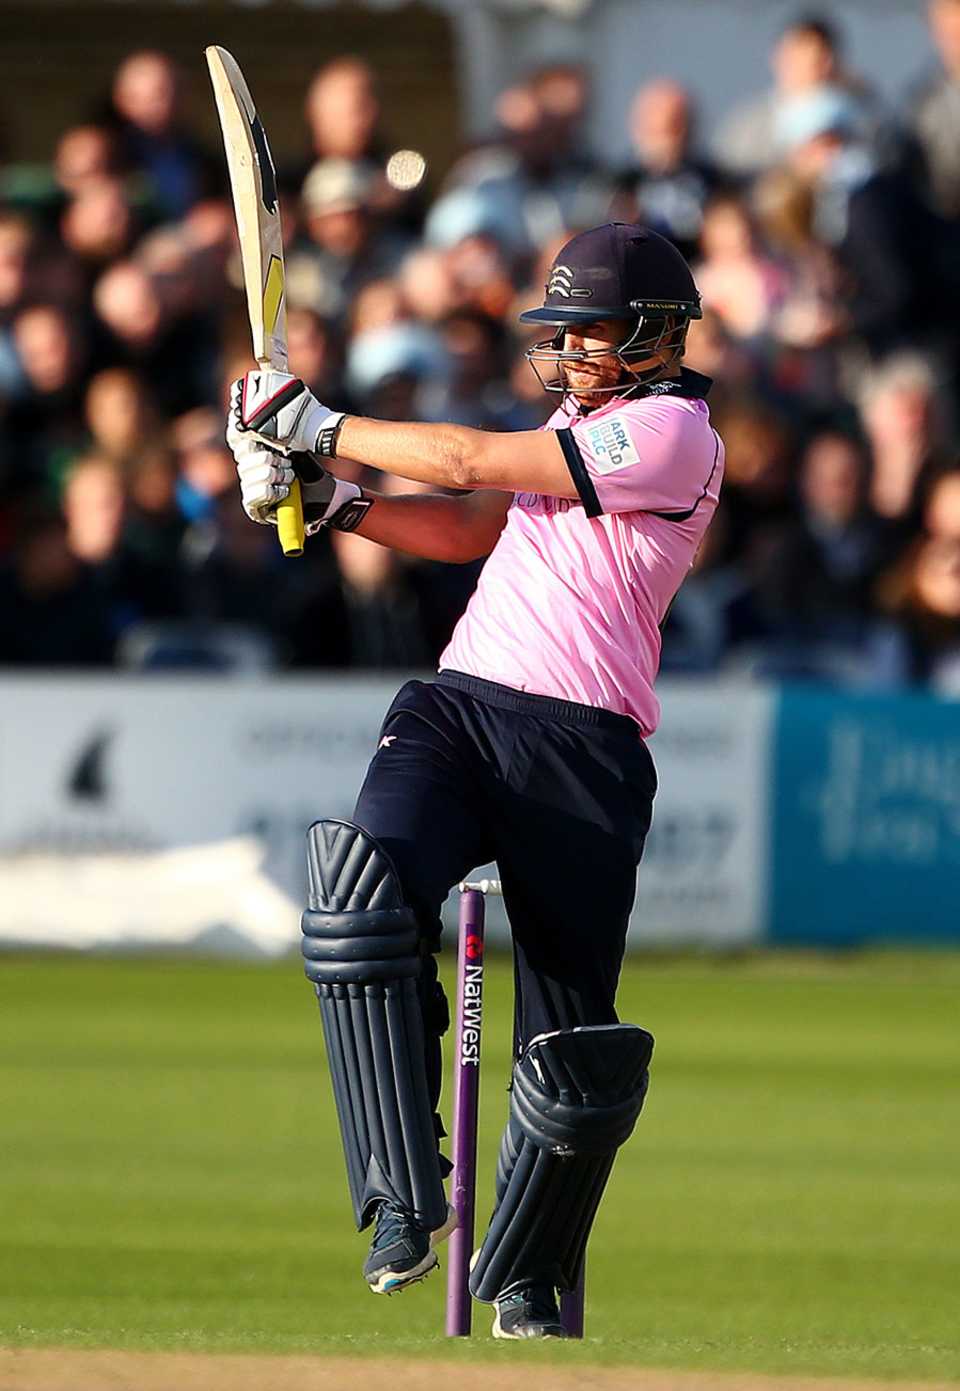 Dawid Malan plundered the Sussex bowling with 115 off 64 balls